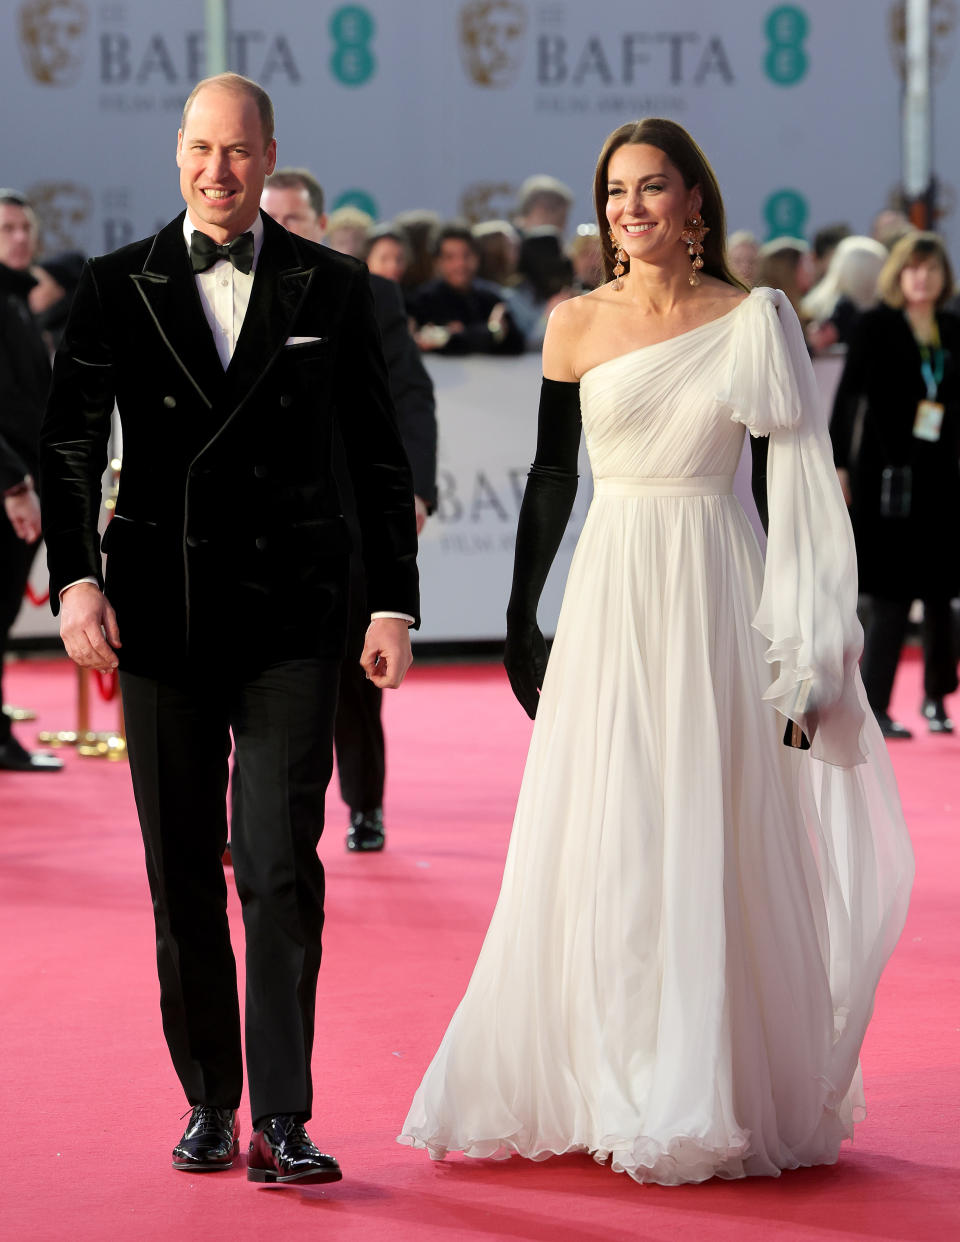 LONDON, ENGLAND - FEBRUARY 19: Catherine, Princess of Wales and Prince William, Prince of Wales attend the EE BAFTA Film Awards 2023 at The Royal Festival Hall on February 19, 2023 in London, England. The Prince of Wales, President of the British Academy of Film and Television Arts (BAFTA), and The Princess will attend the Awards ceremony before meeting category winners and EE Rising Star Award nominees. (Photo by Chris Jackson/Getty Images)